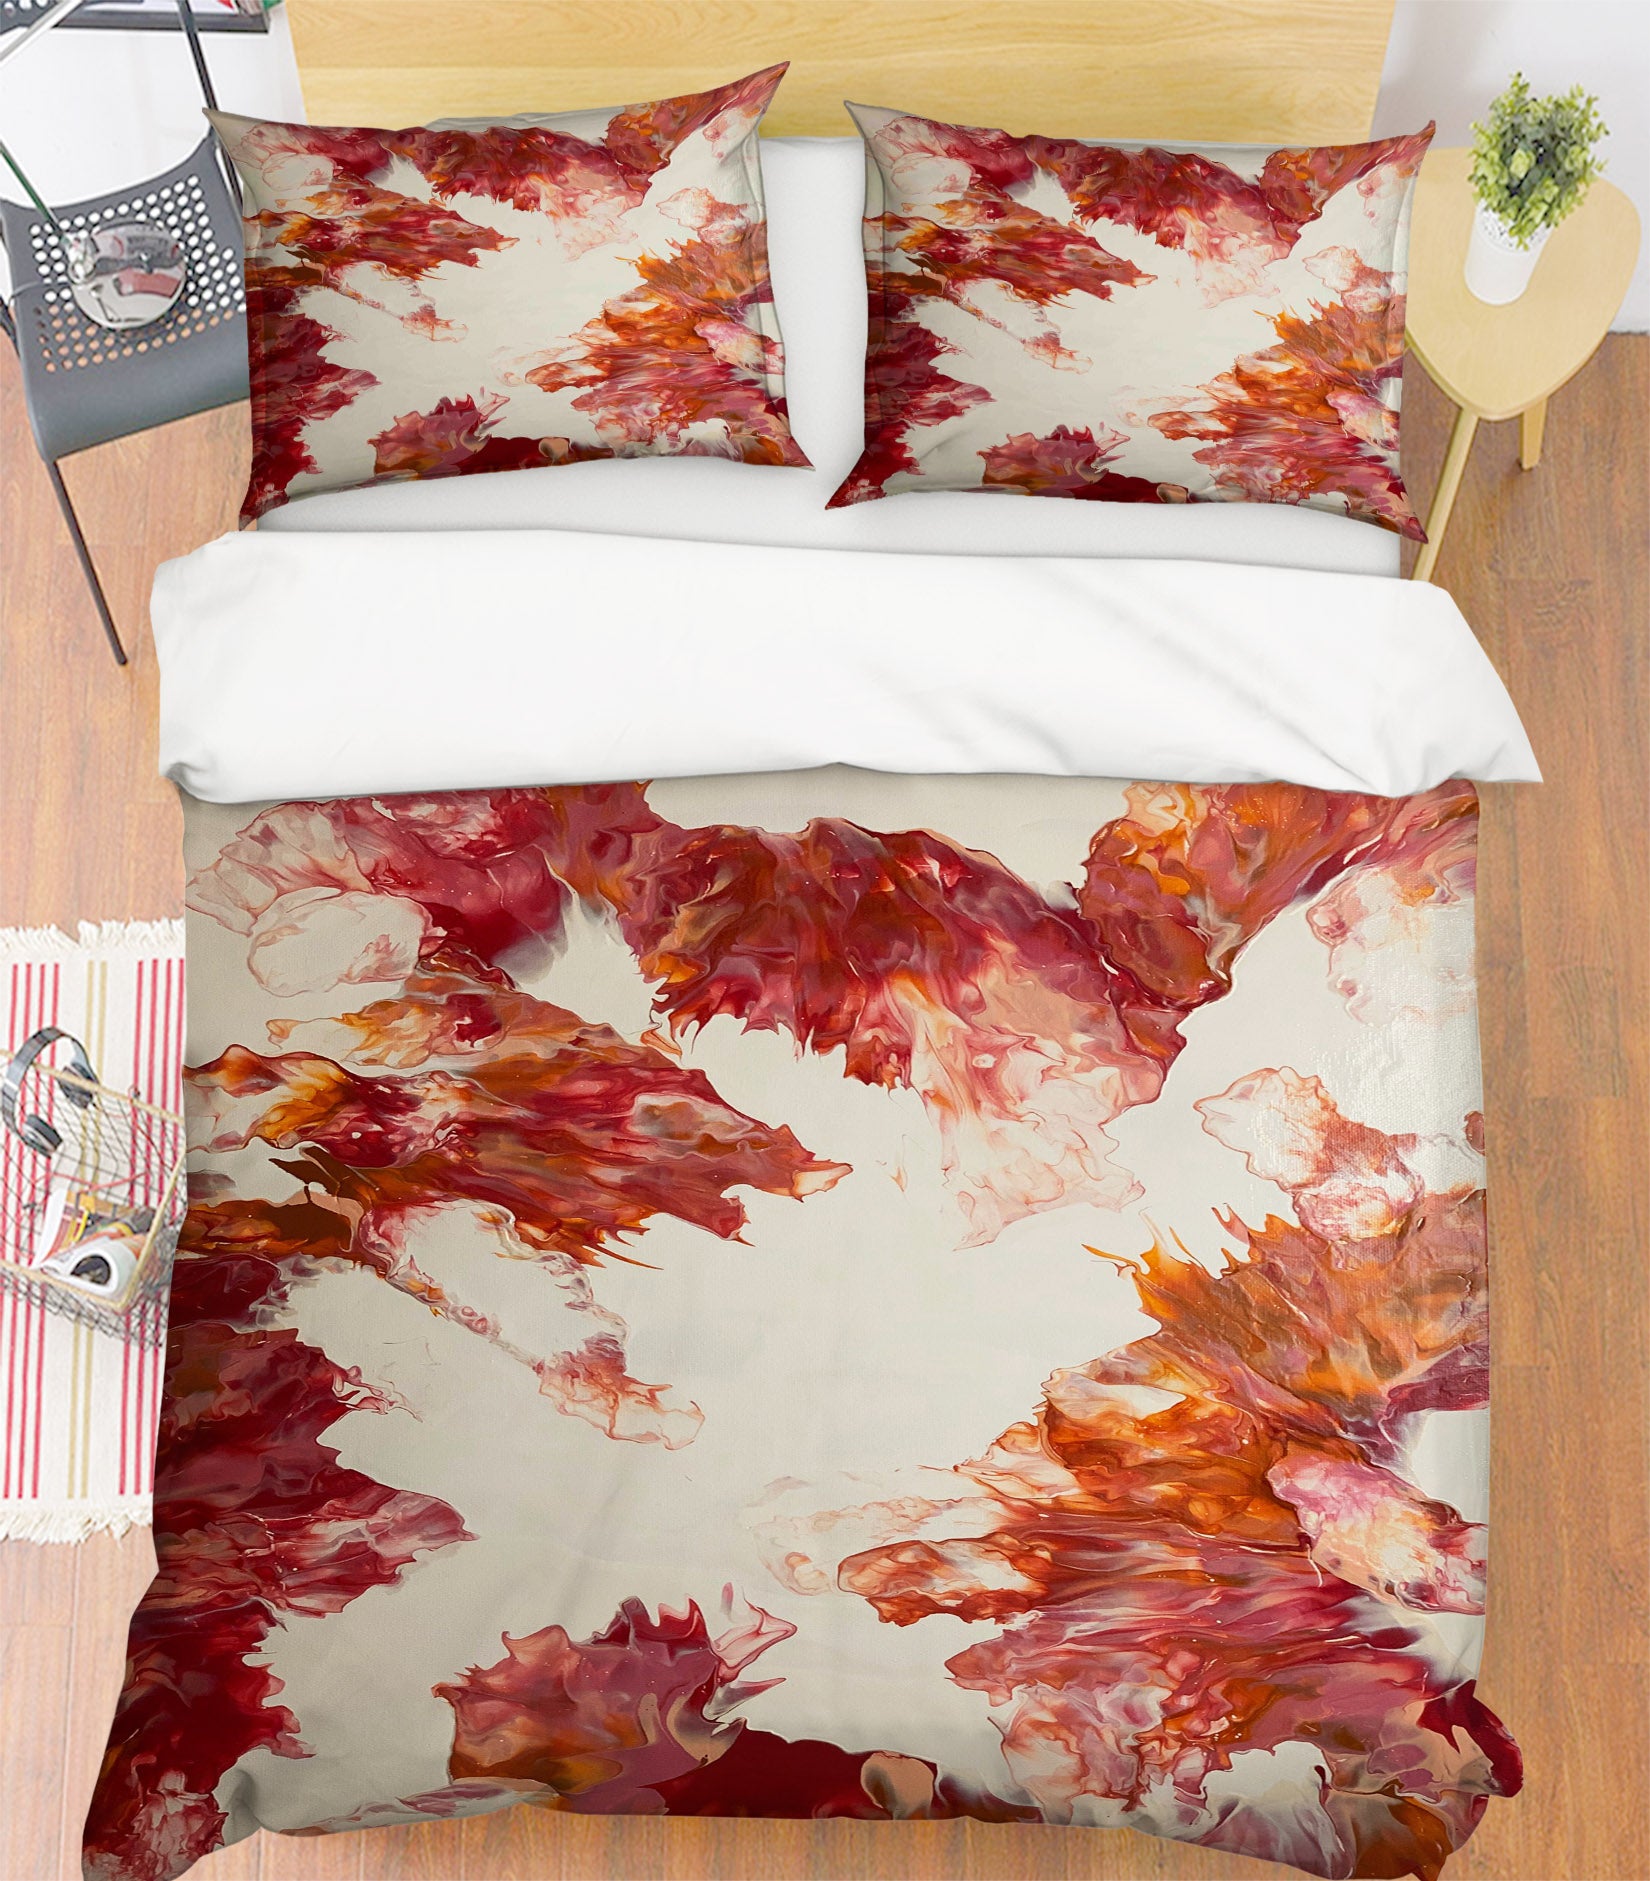 3D Red Light Brown Pattern 40050 Valerie Latrice Bedding Bed Pillowcases Quilt